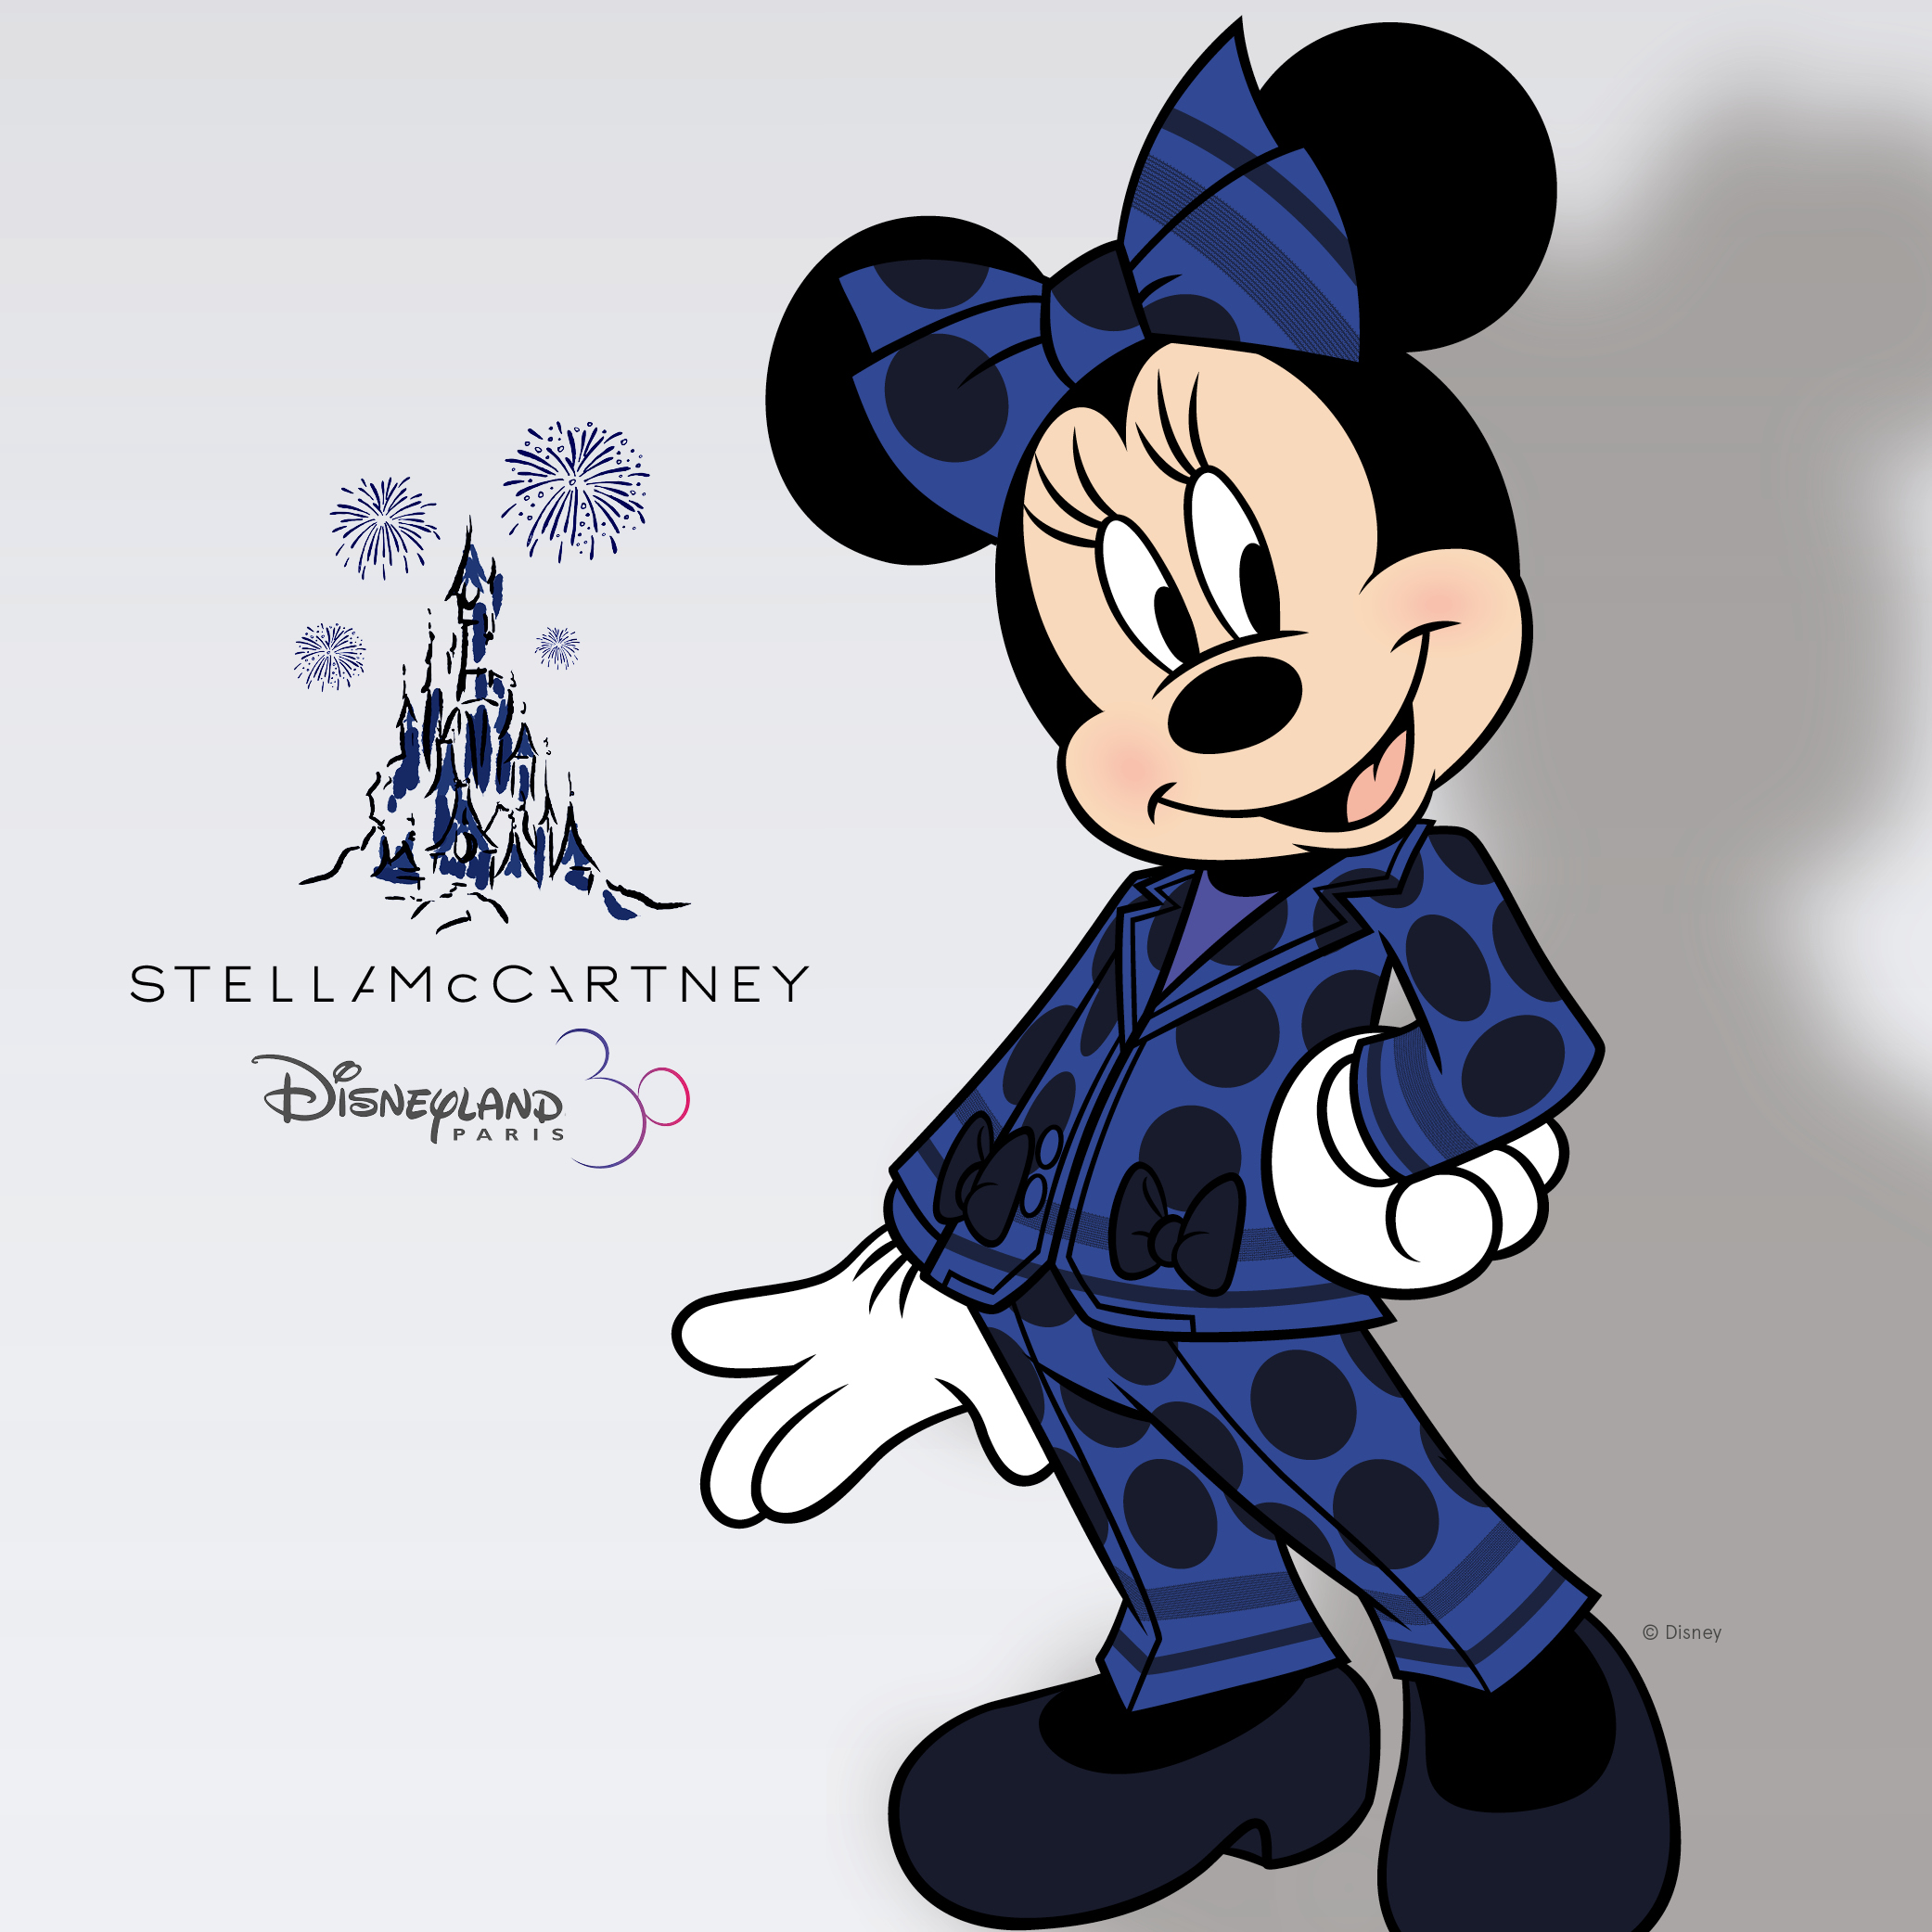 THE FIRST ULTRACHIC PANTSUIT FOR MINNIE MOUSE AT DISNEYLAND PARIS, AS DESIGNED BY STELLA MCCARTNEY HERSELF!